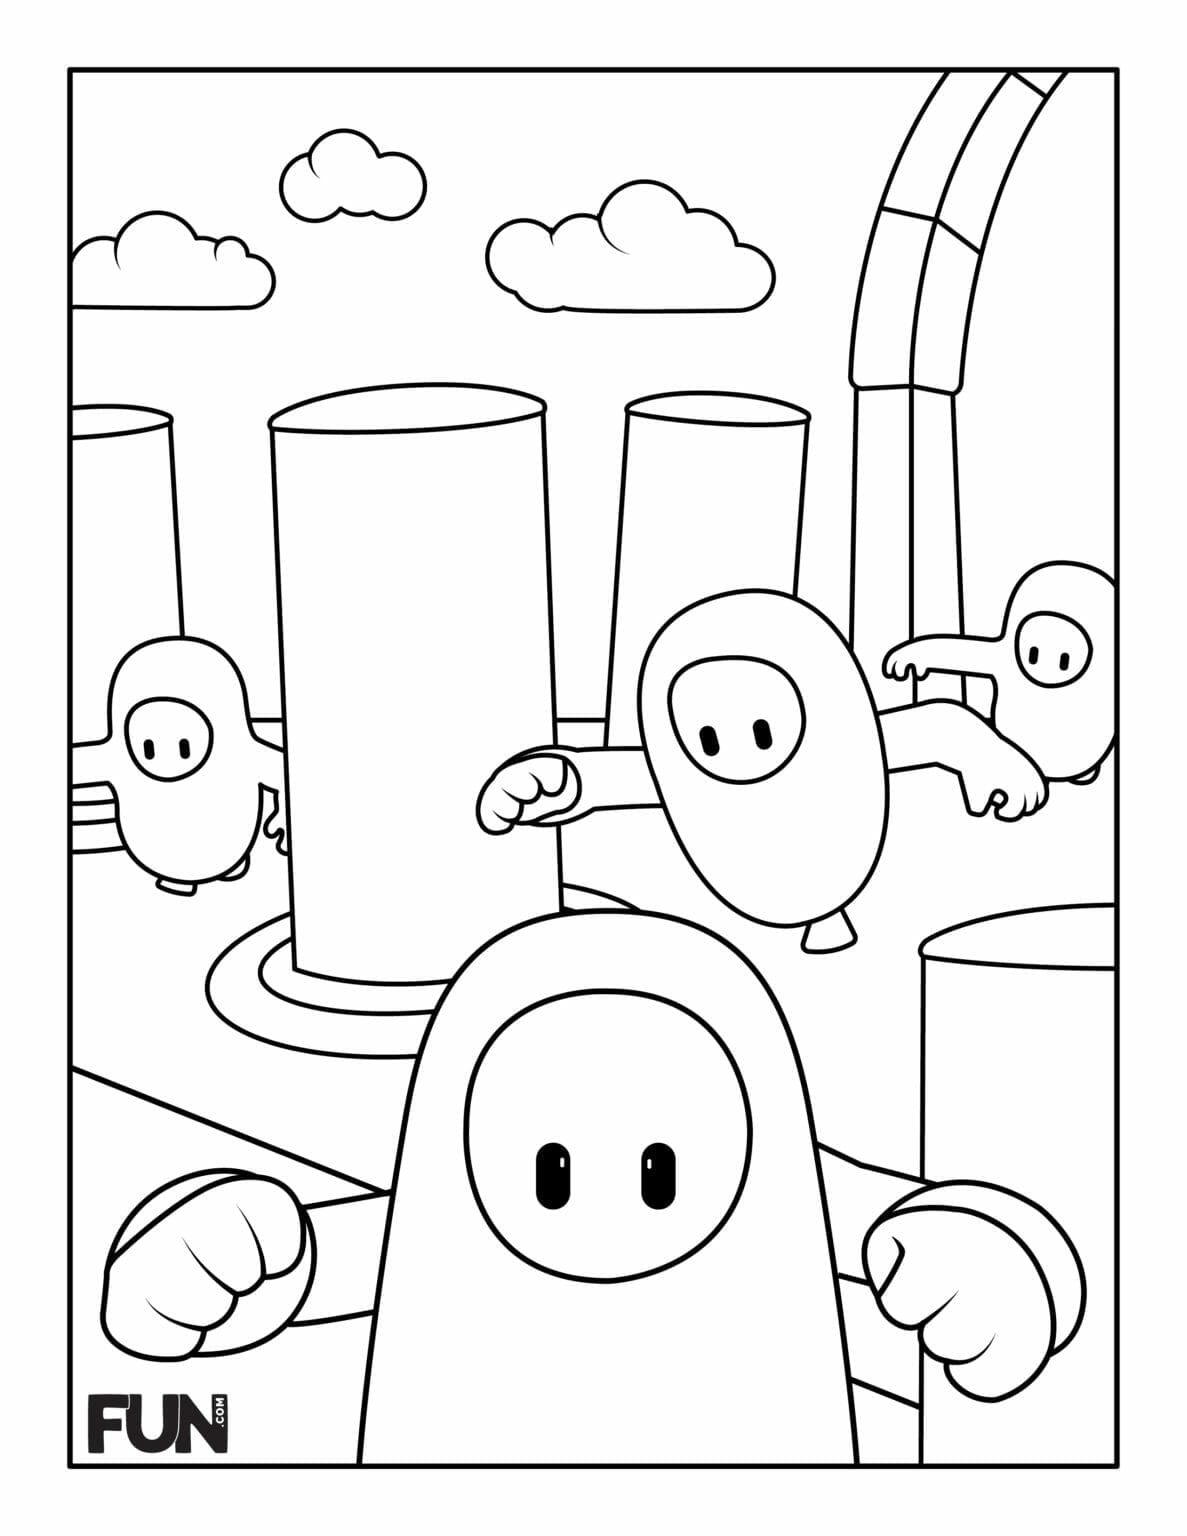 Free to Download: Computer game colouring-in sheets